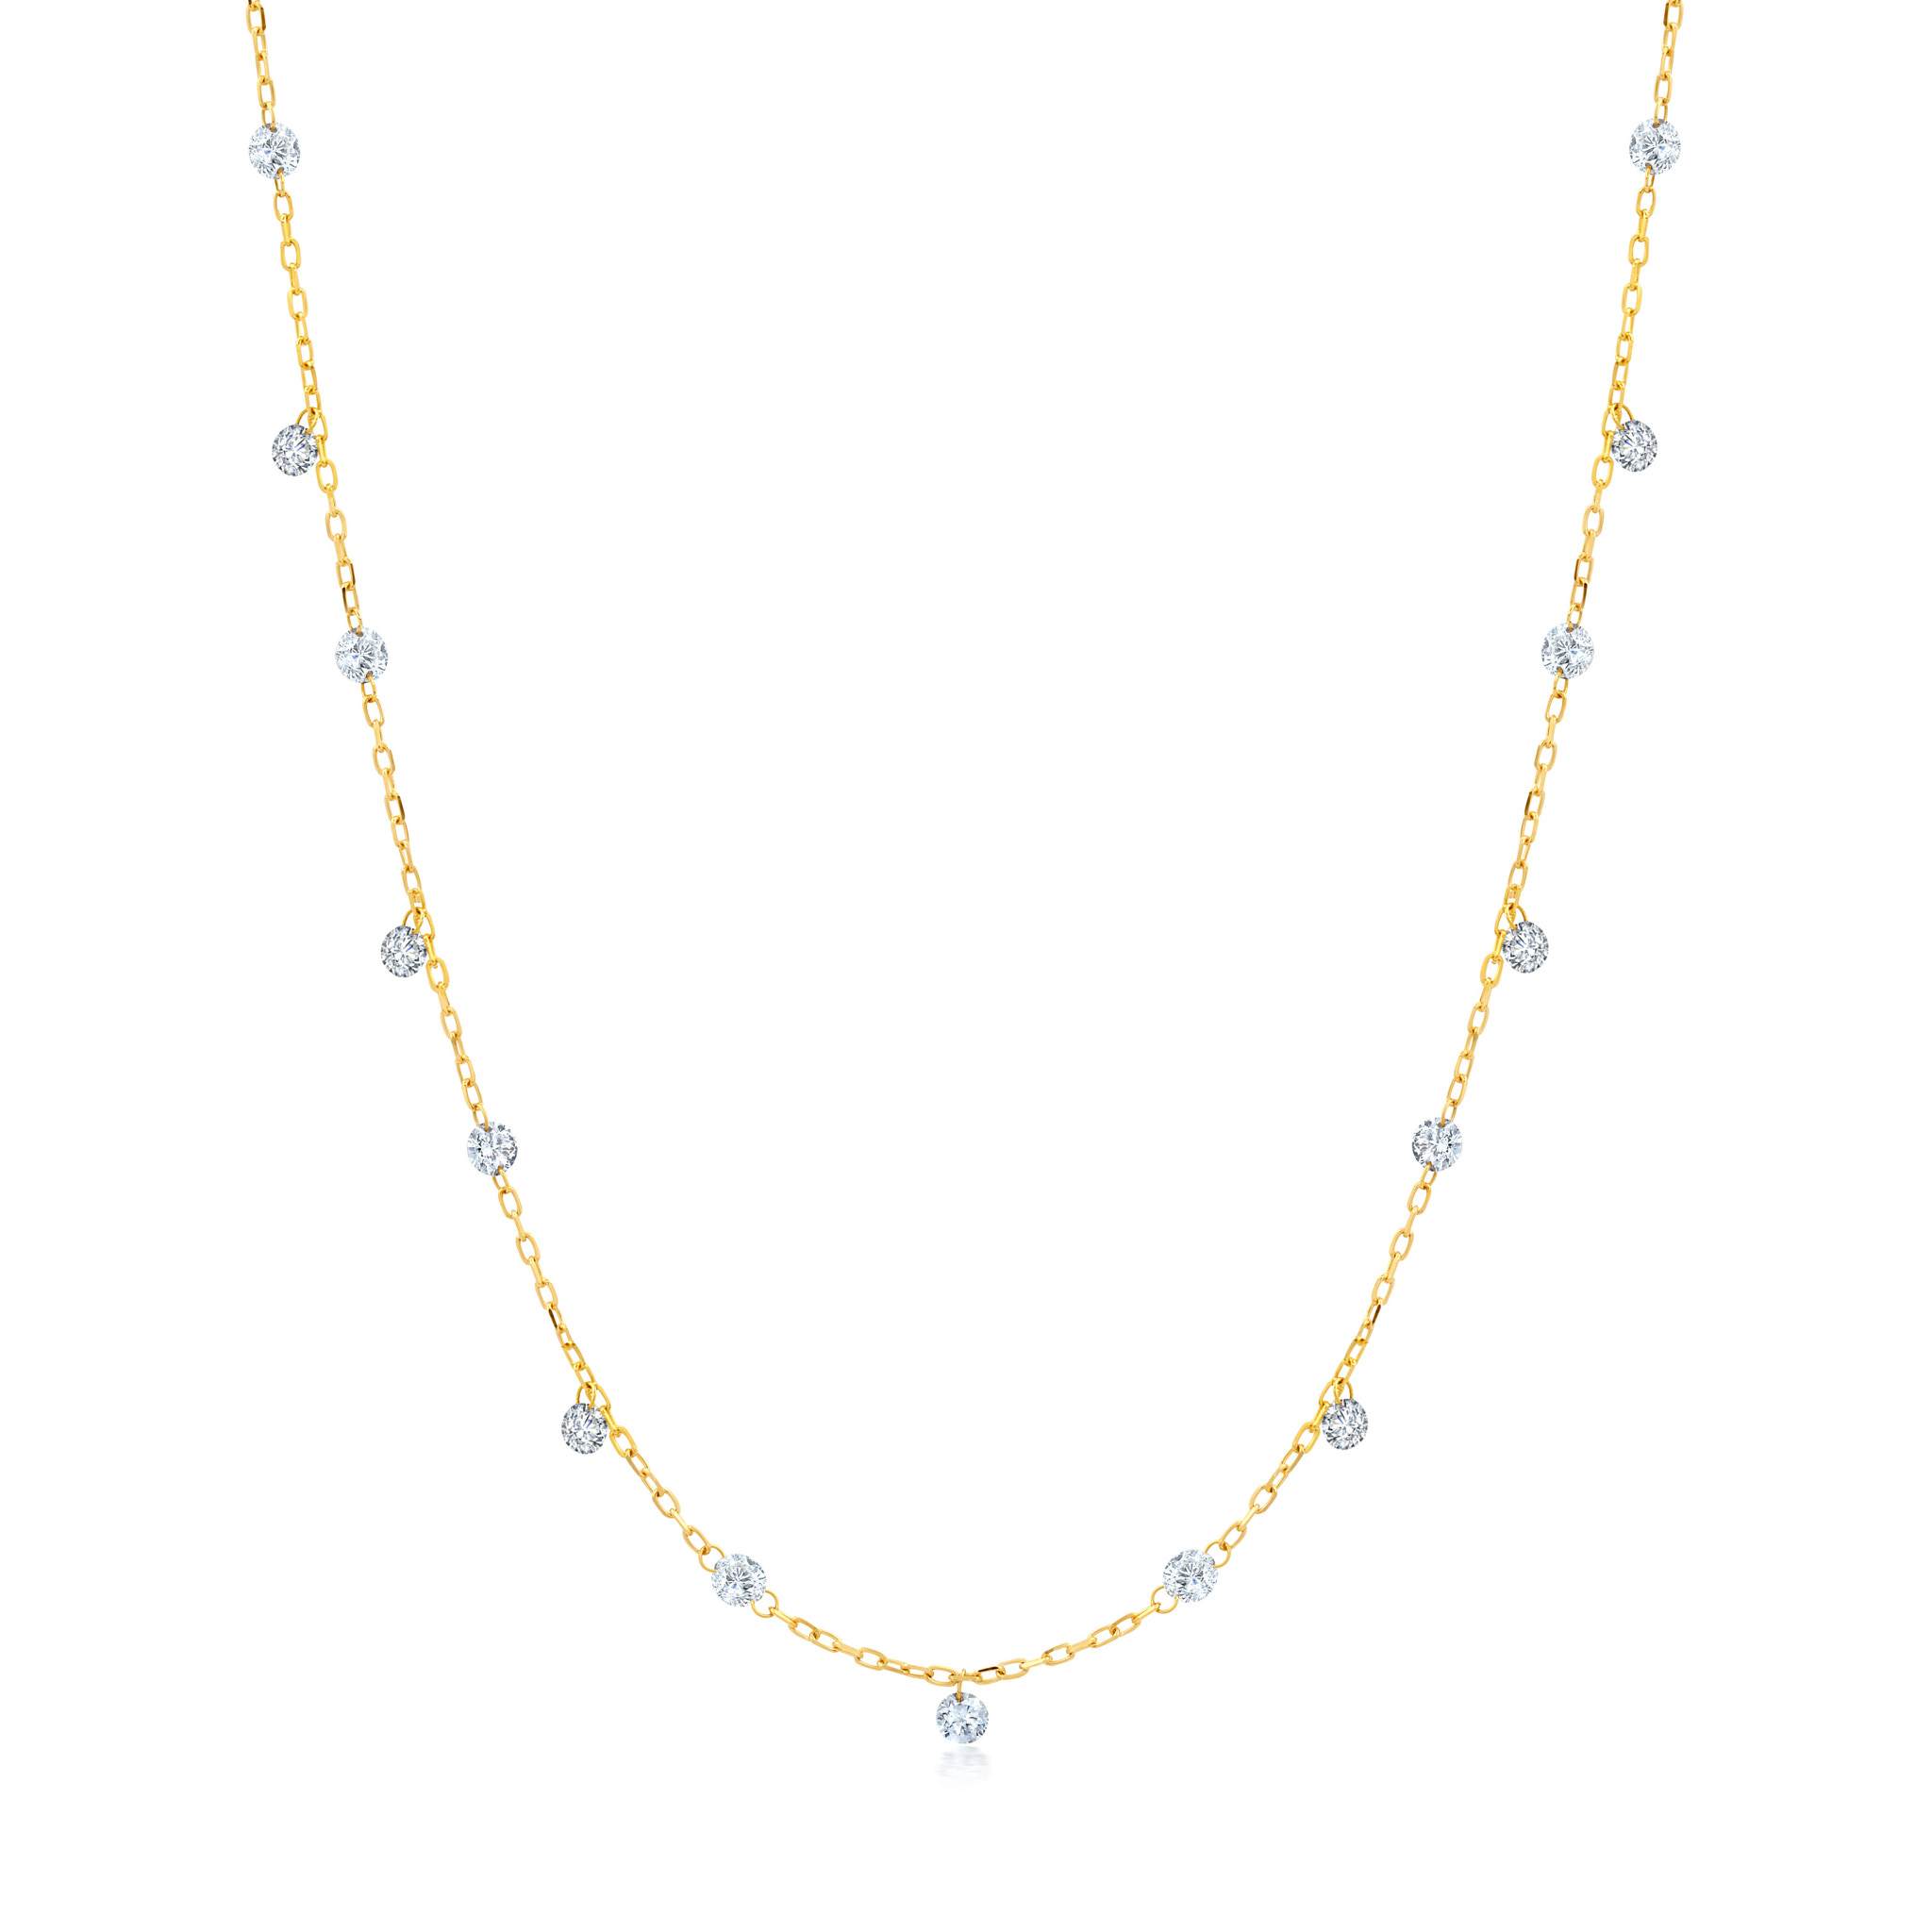 Graziela Gems - Necklace - 1 Ct Floating Diamond Drop & Station Necklace - Yellow Gold